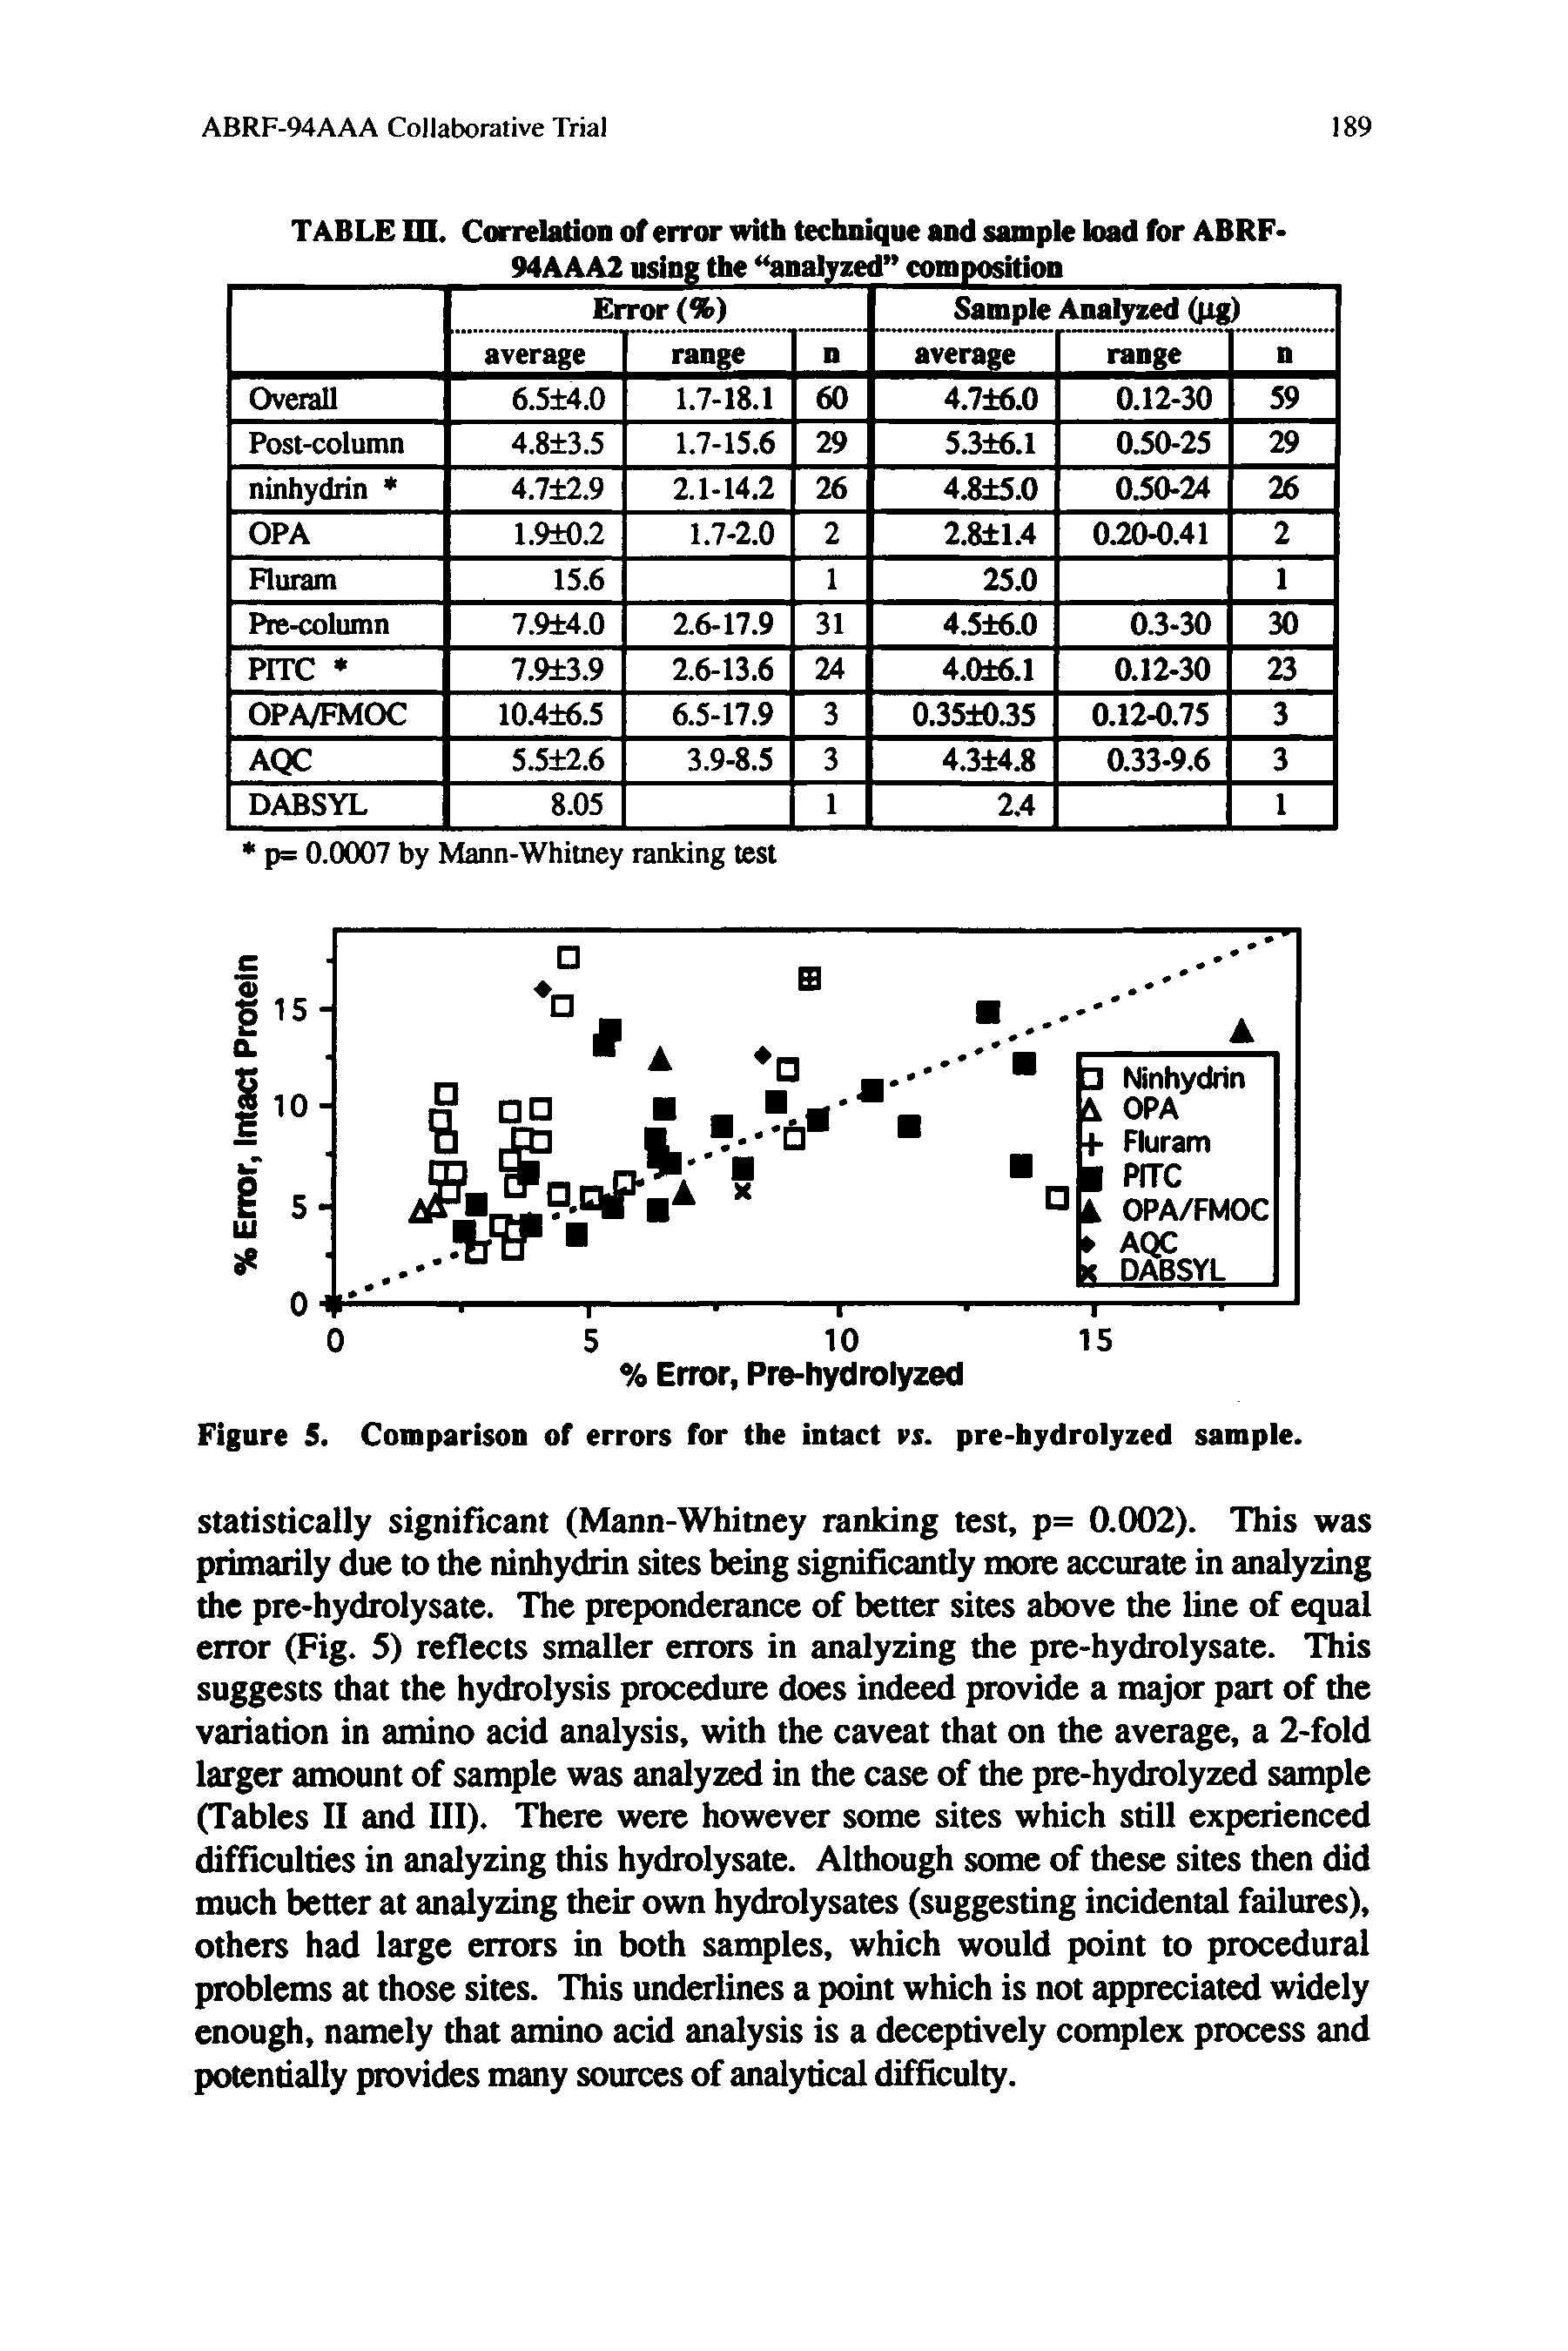 Figure 5. Comparison of errors for the intact rs. pre-hydrolyzed sample.